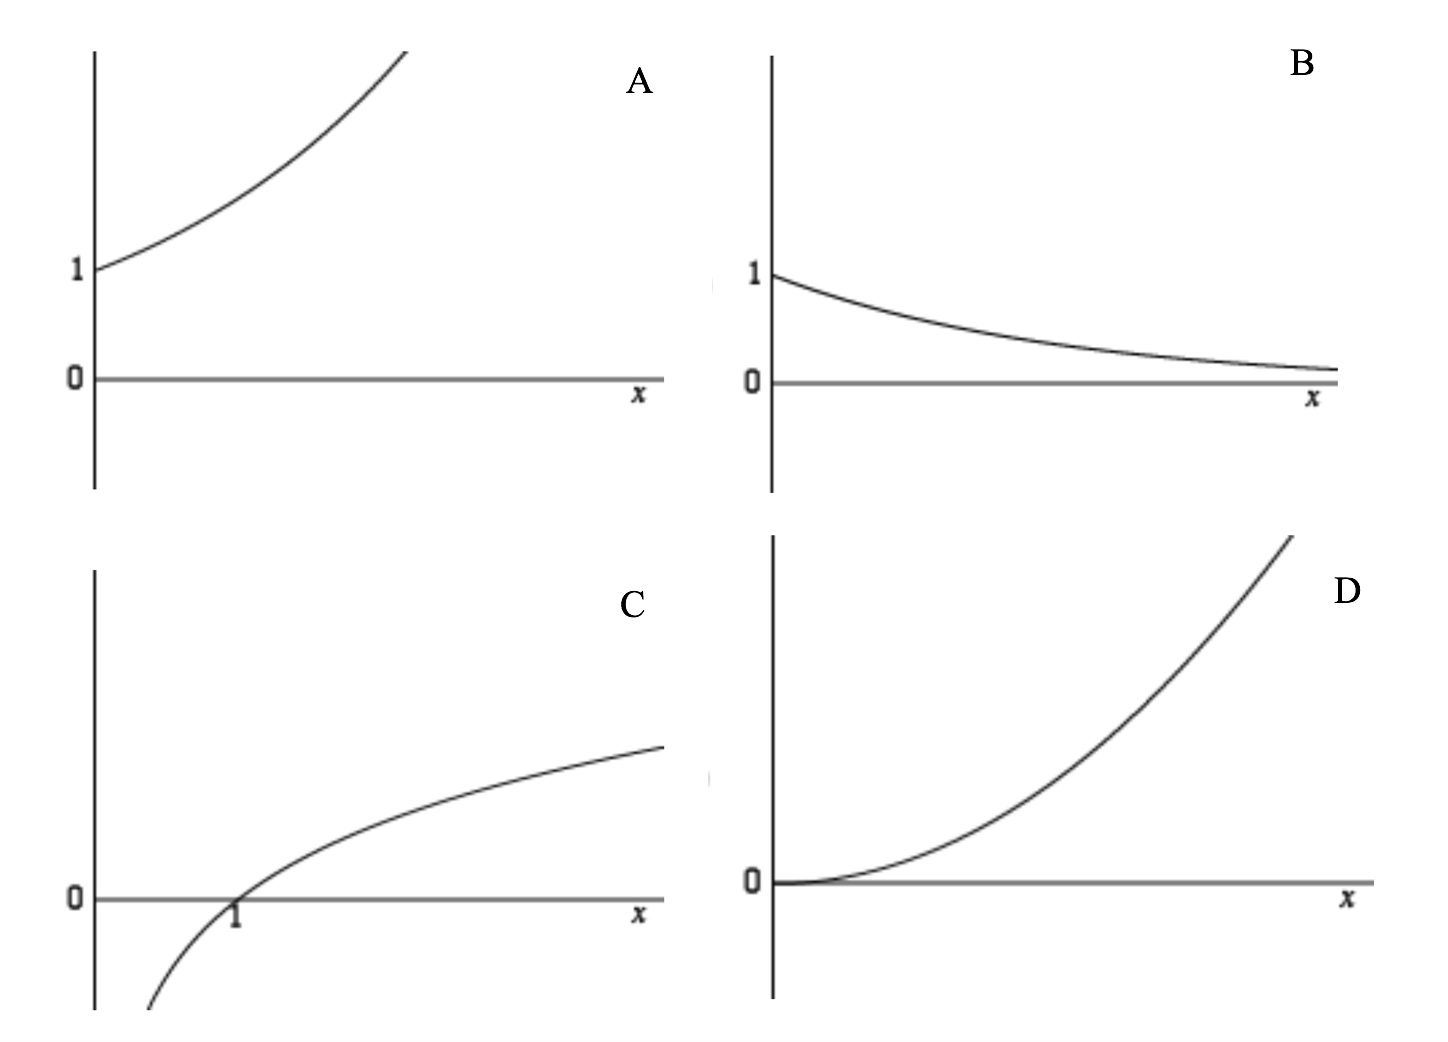 Four graphs. Graph A starts a 1 and is increasing with increasing slope, graph B starts at 1 and is decreasing with decreasing slope, Graph C starts below 1 and increases with decreasing slope, crossing the y-axis at y=1, Graph D starts at 0 and is increasing with increasing slope.